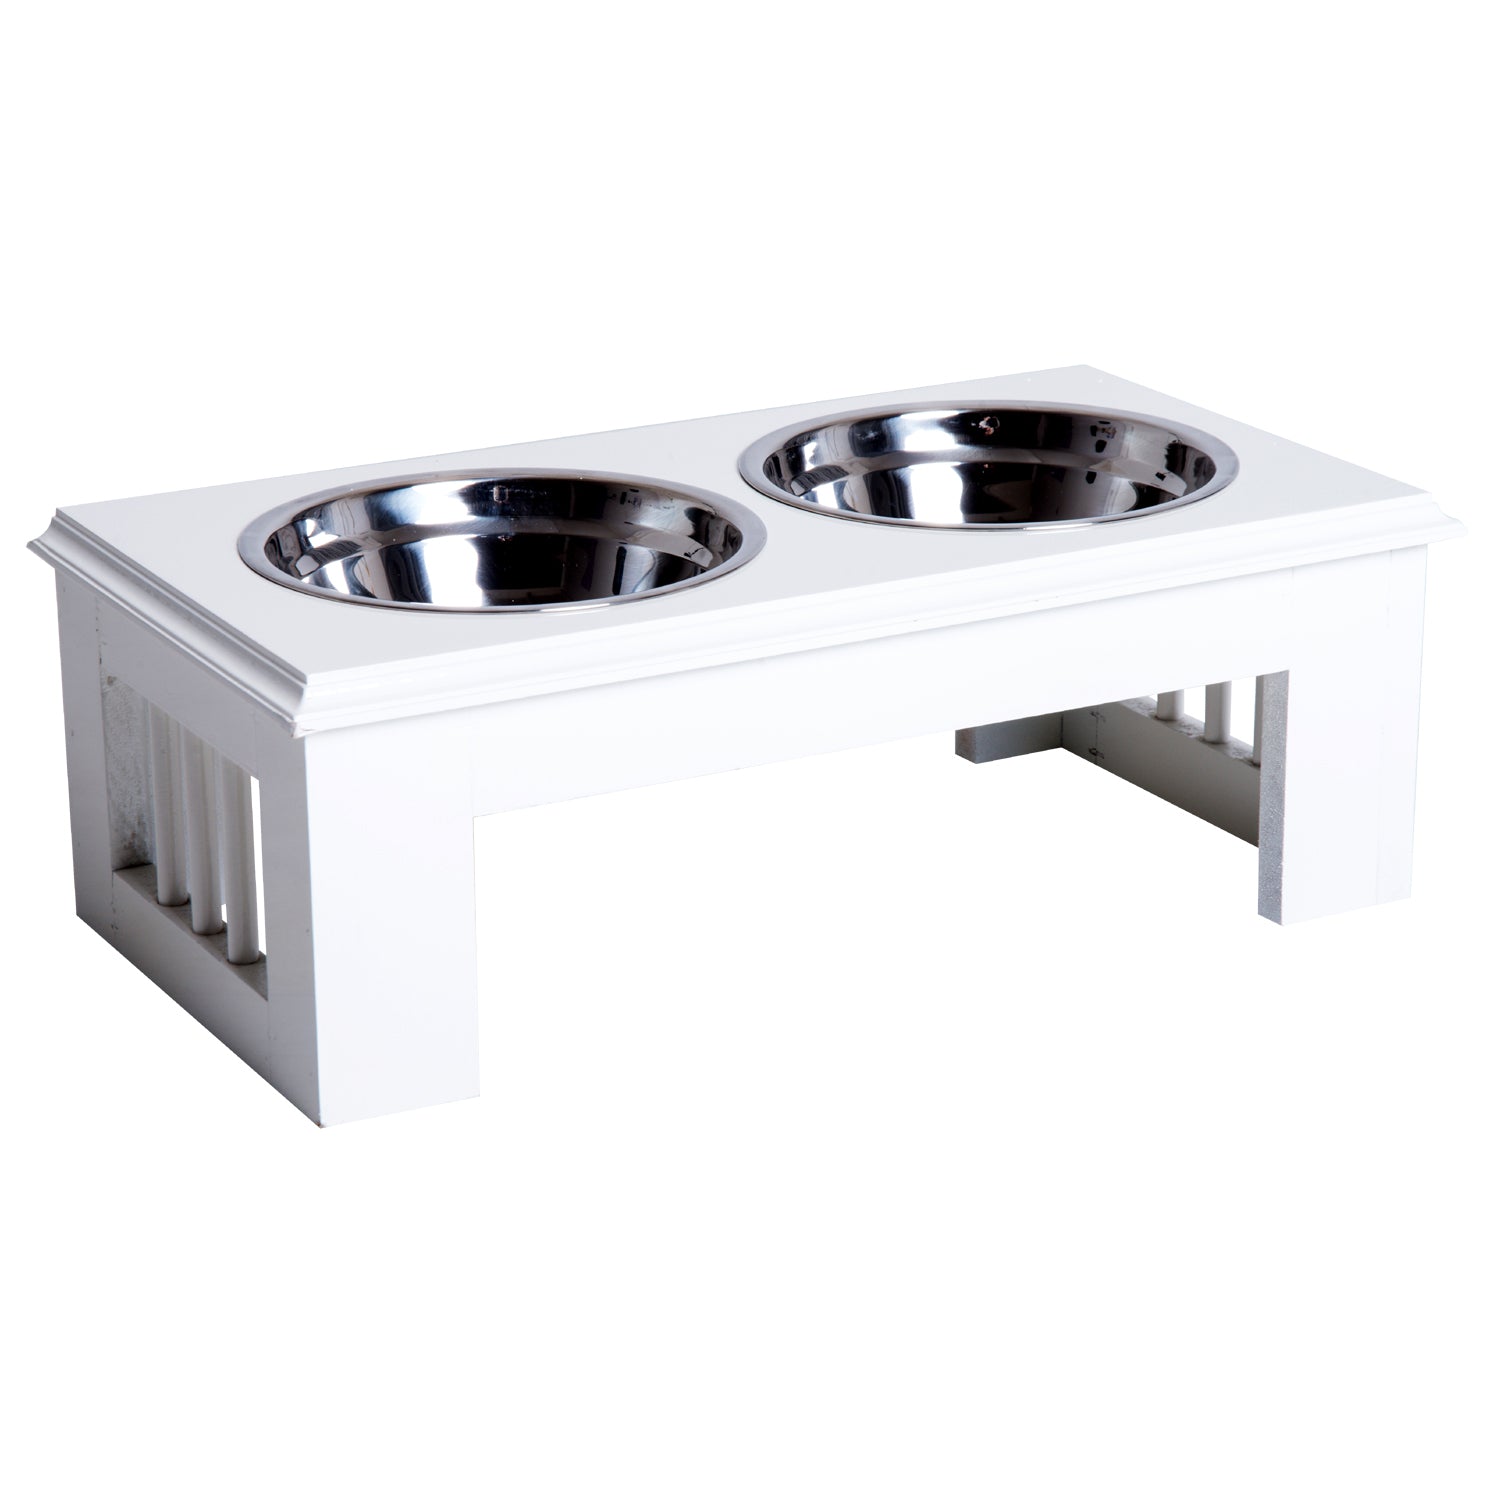 Stainless Steel Pet Feeder, 43.7Lx24Wx15H cm-White